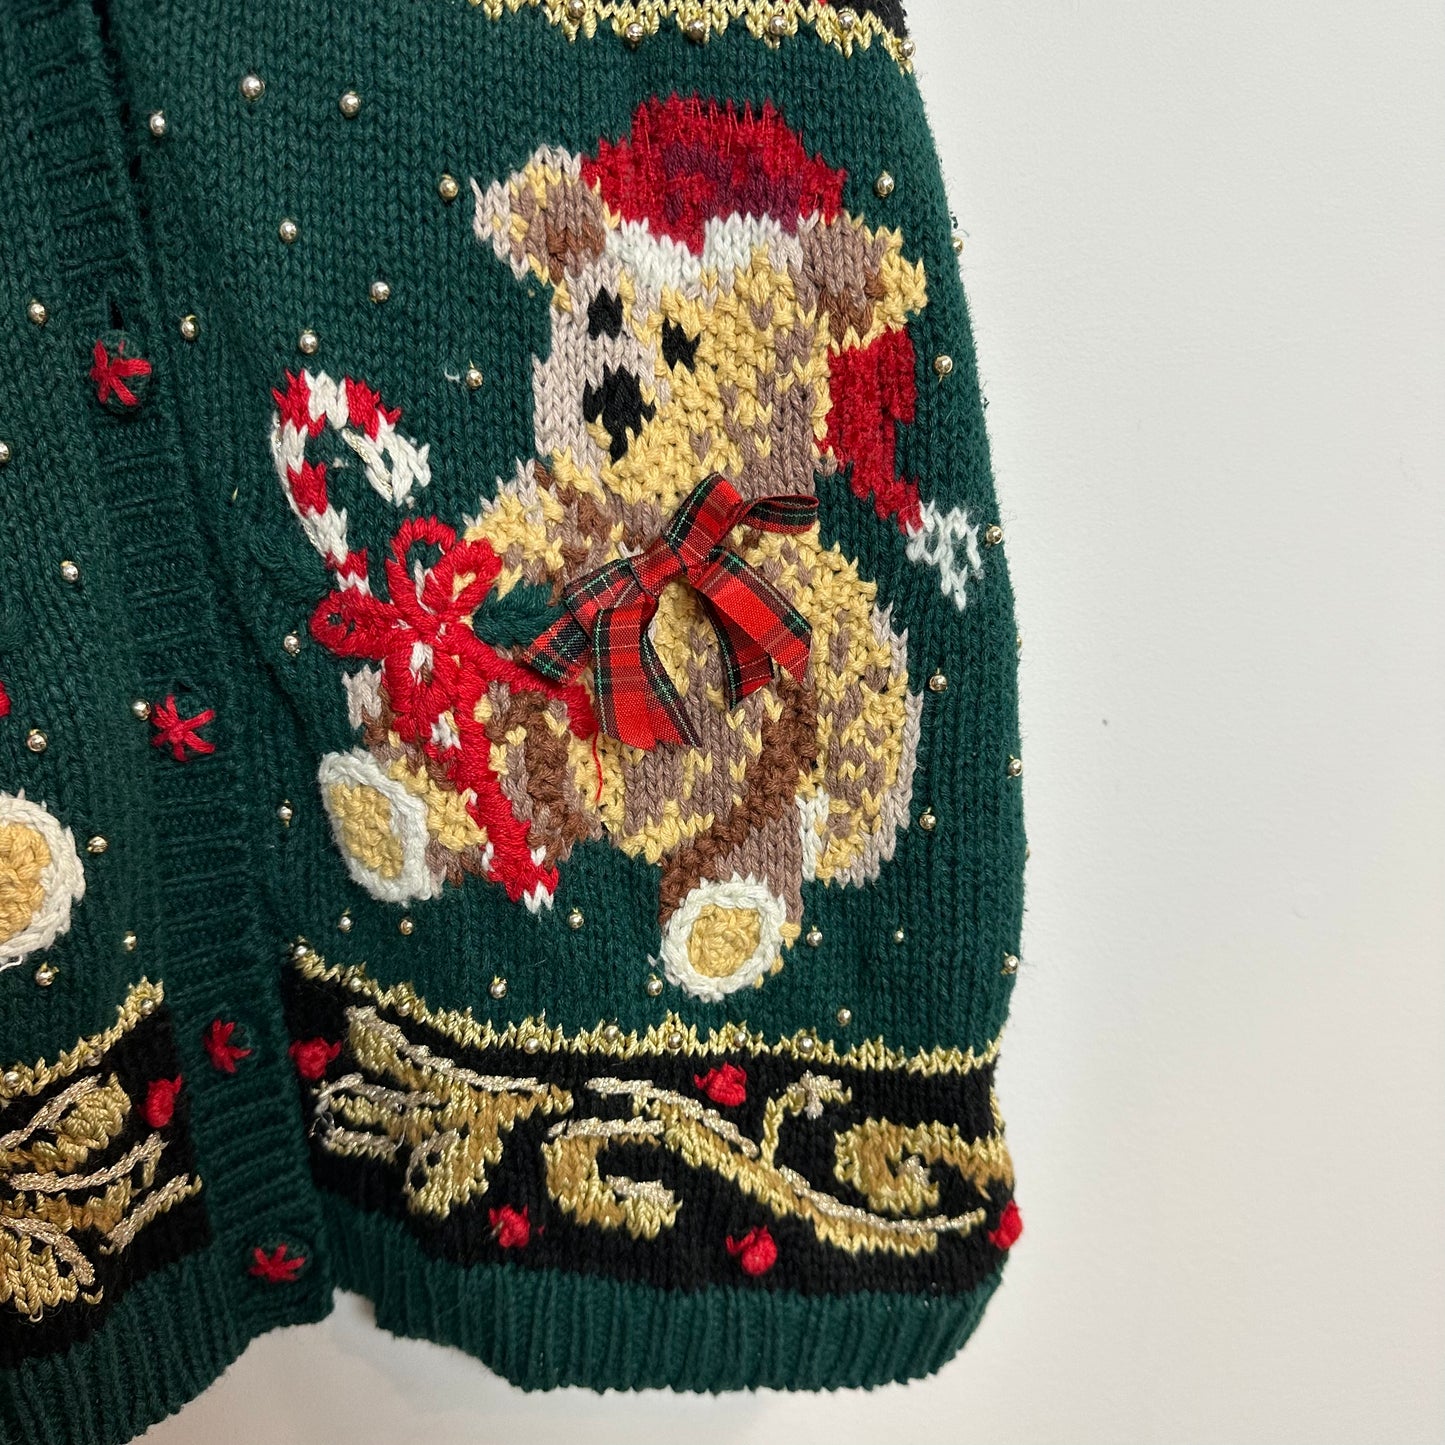 Vintage 90s Christmas Sweater Vest Chunky Knit Teddy Bears Red Green Plaid